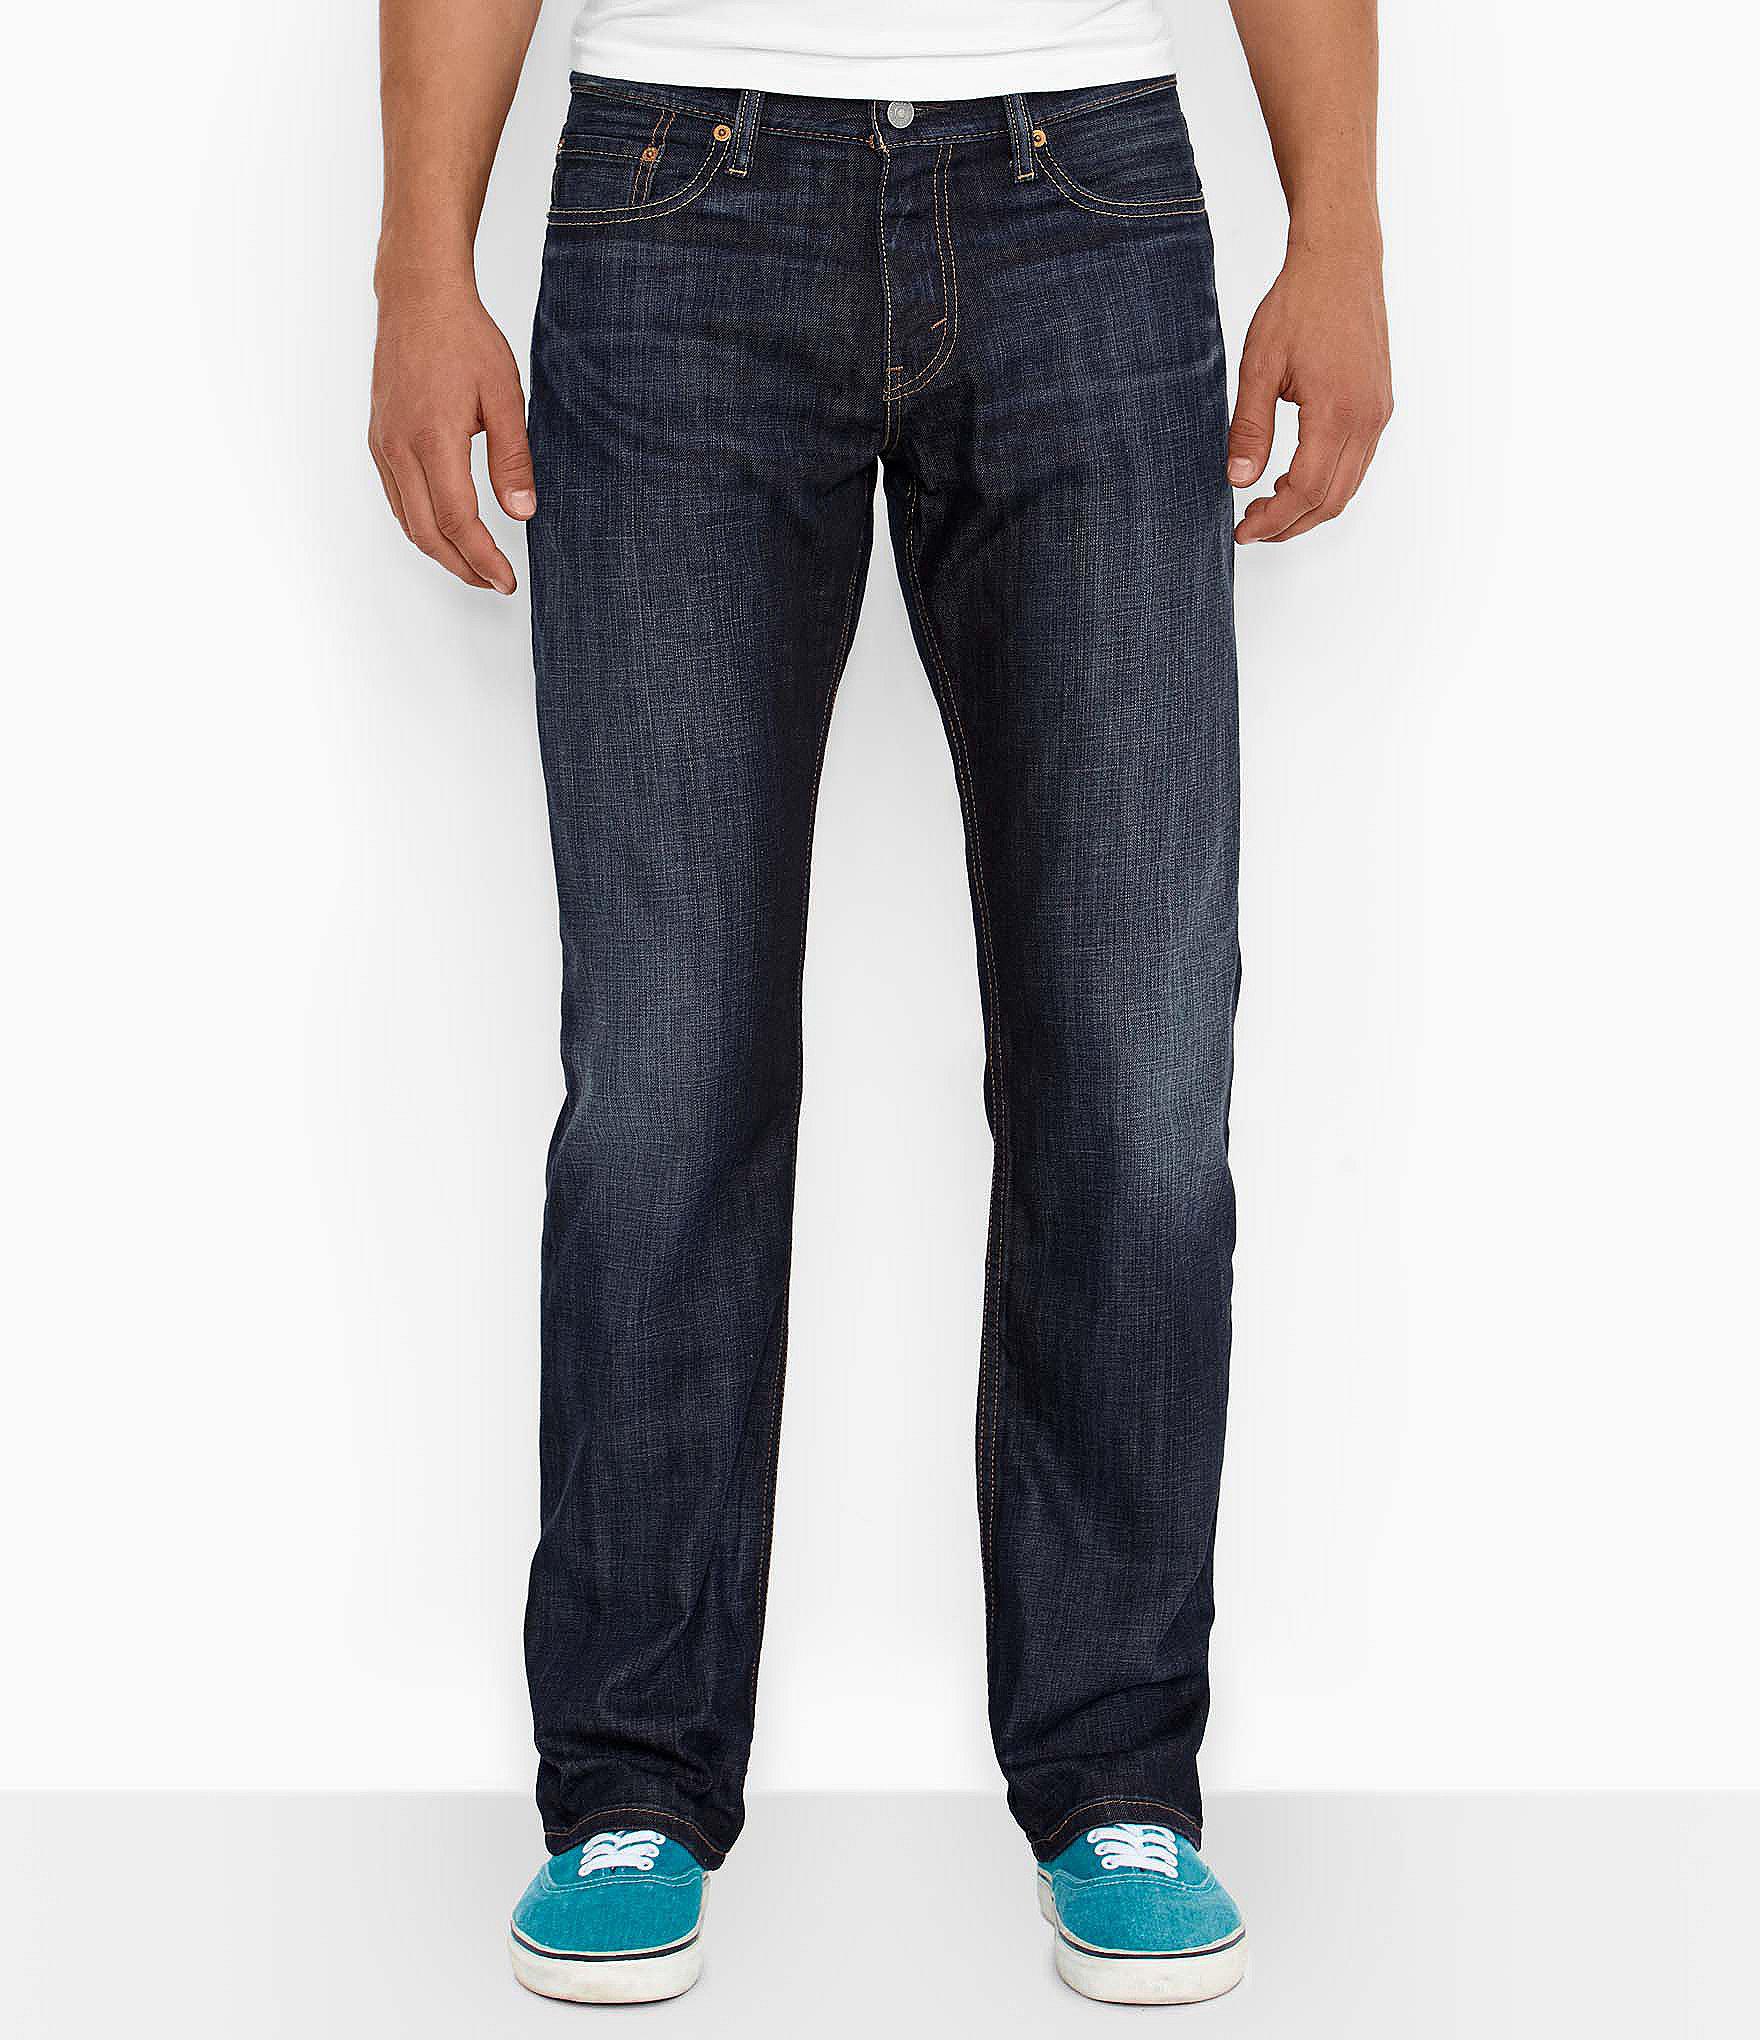 Lyst - Levi's 514 Straight-fit Jeans in Black for Men